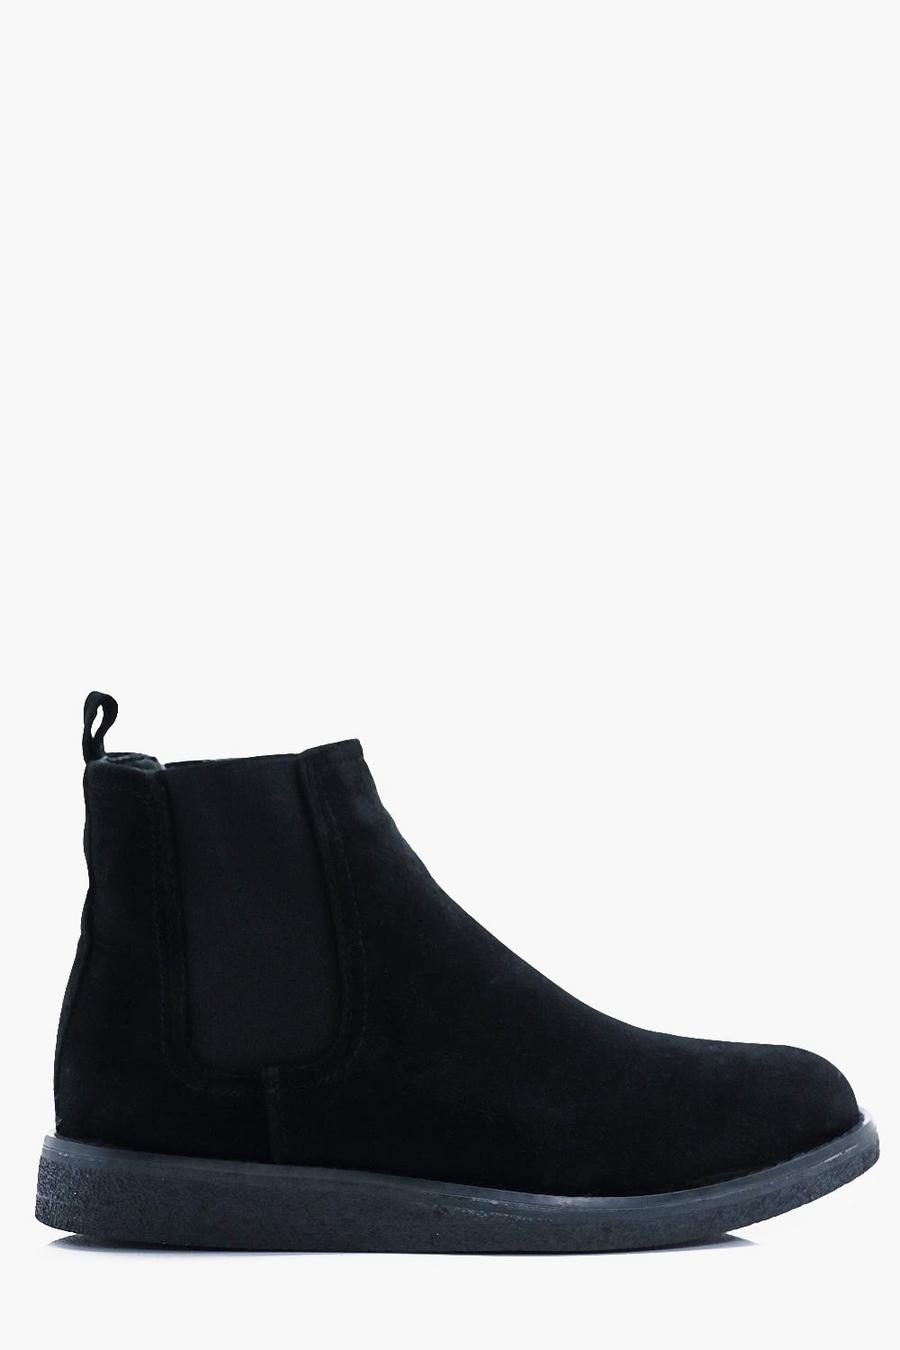 Black Wedge Sole Chelsea Boots image number 1